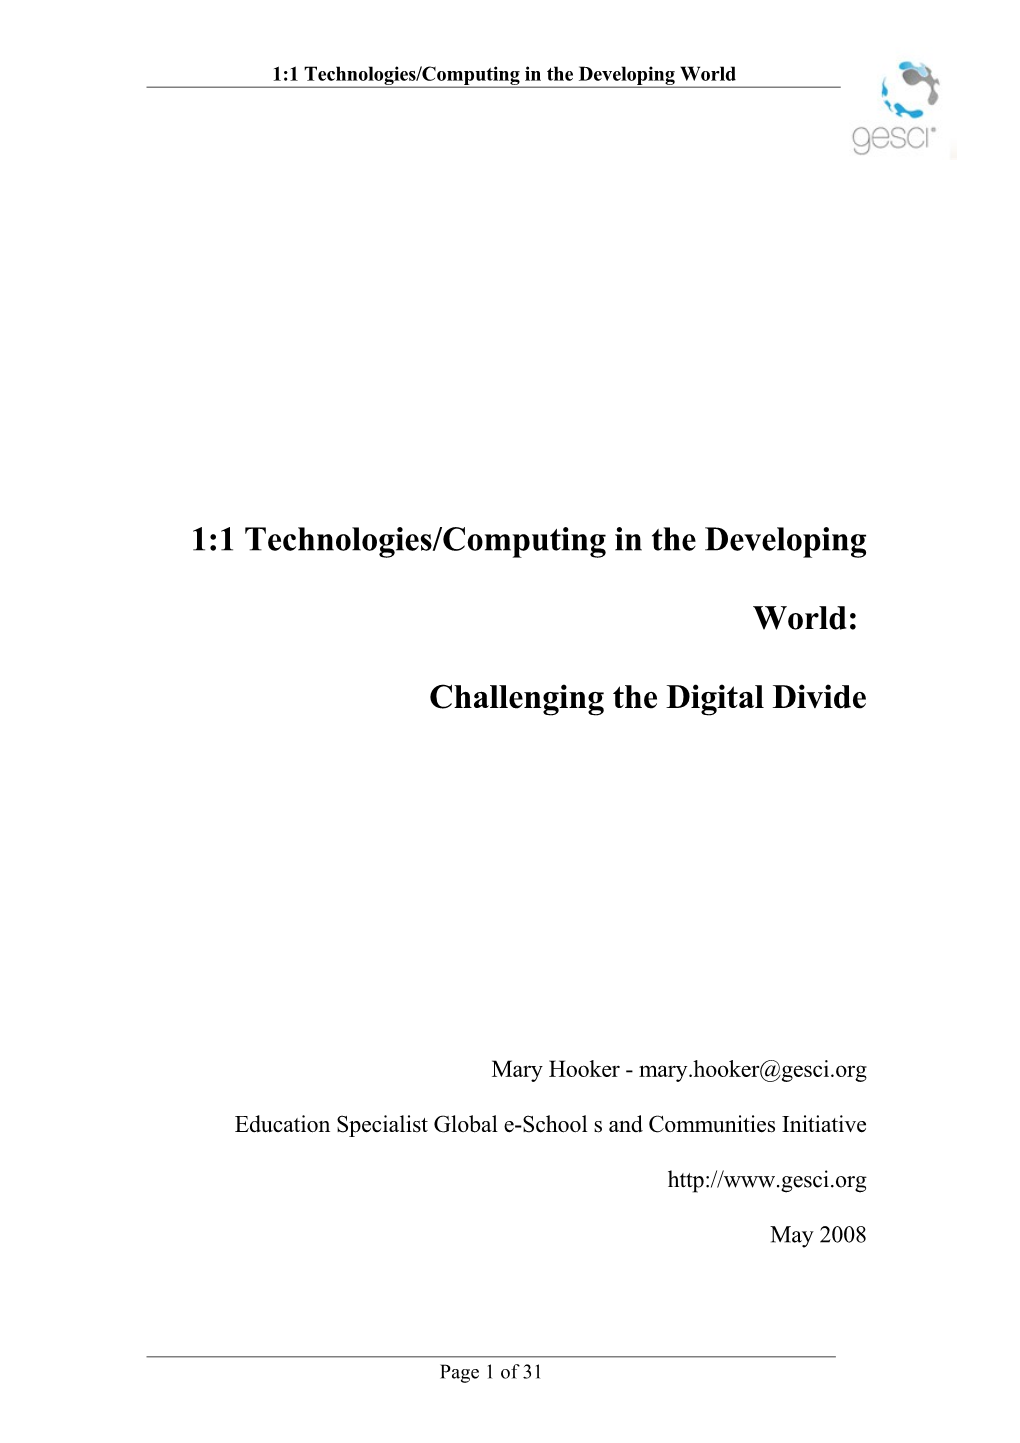 1:1 Technologies/Computing in the Developing World